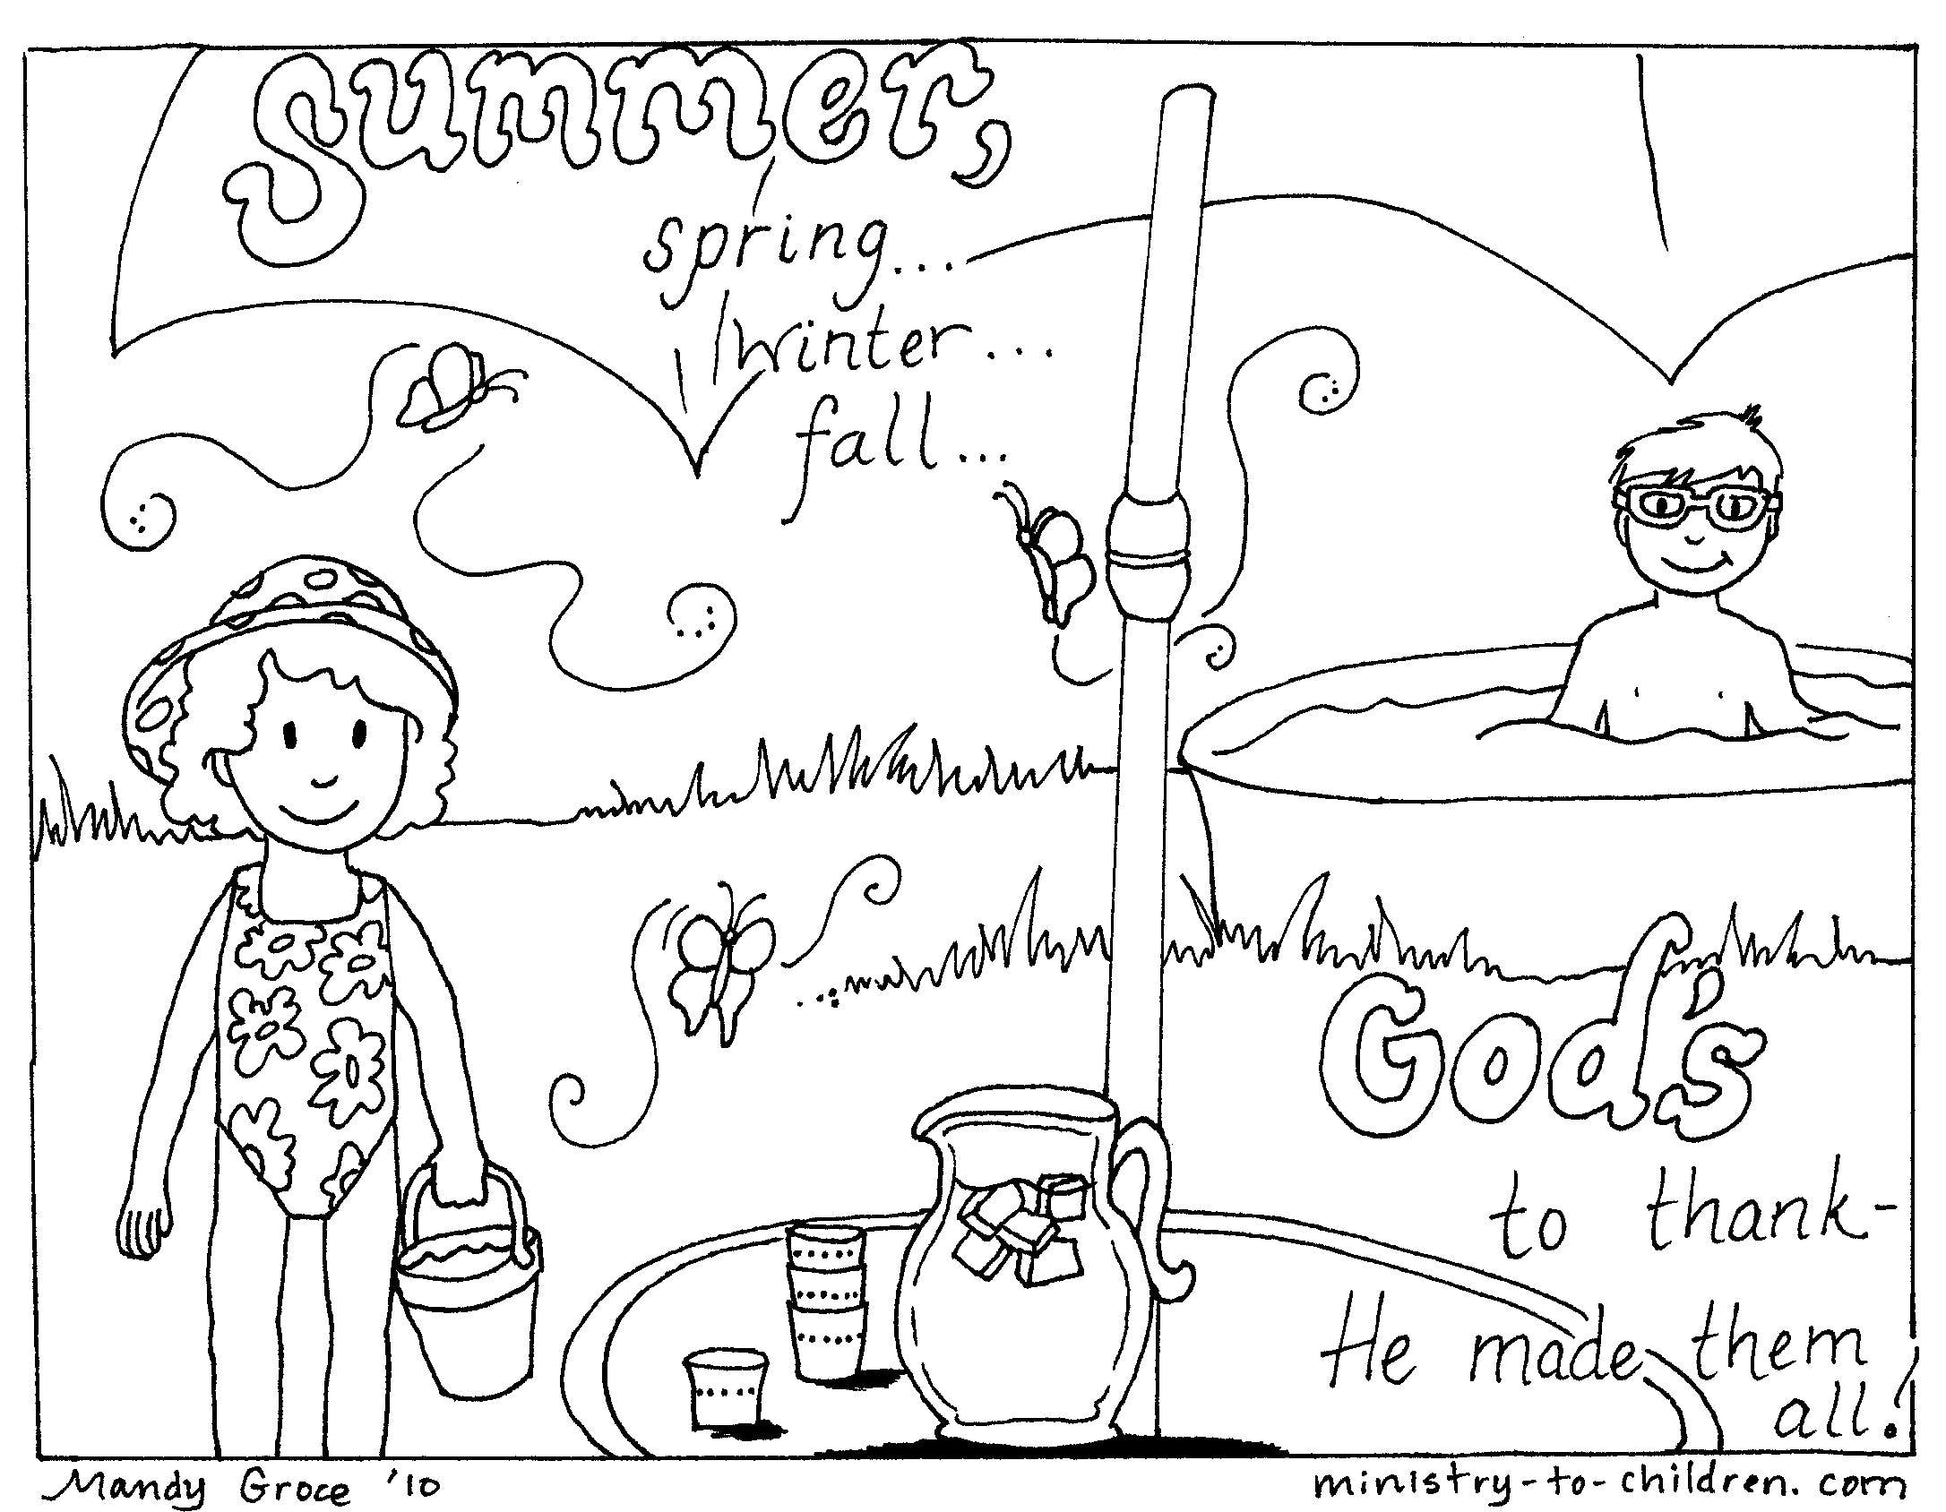 God's Good Creation - 23 Page Coloring Book & Teacher Talking Points - Sunday School Store 